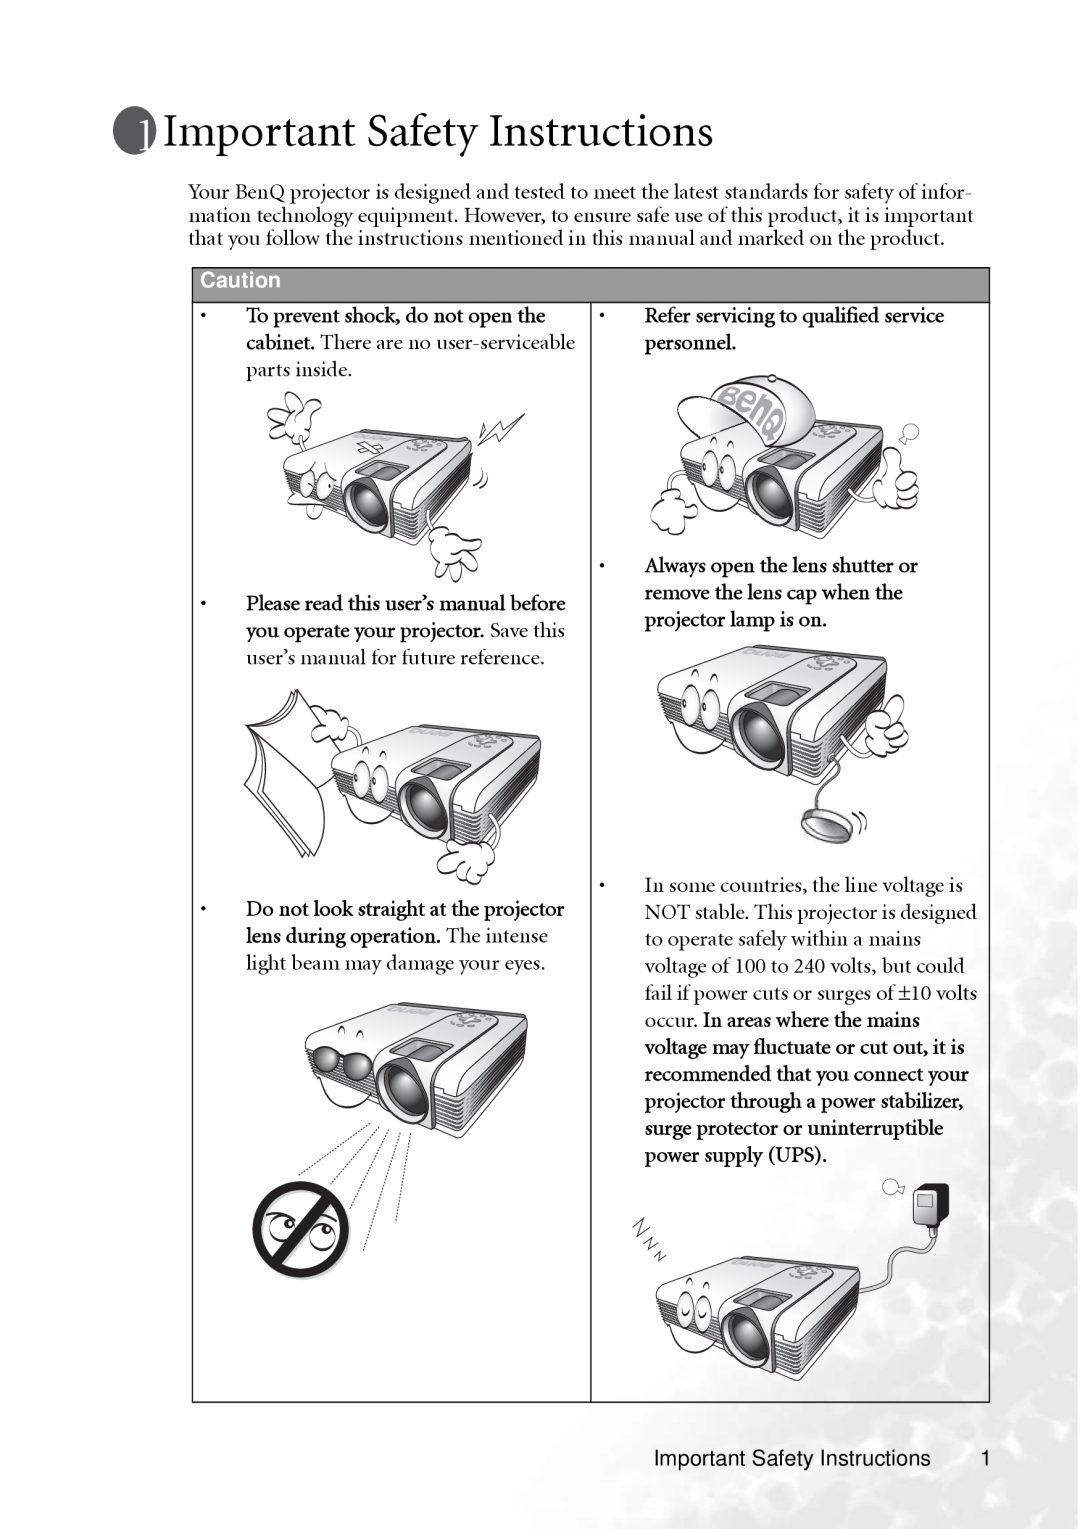 BenQ PB8250, PB8240 user manual Important Safety Instructions, Refer servicing to qualified service personnel 